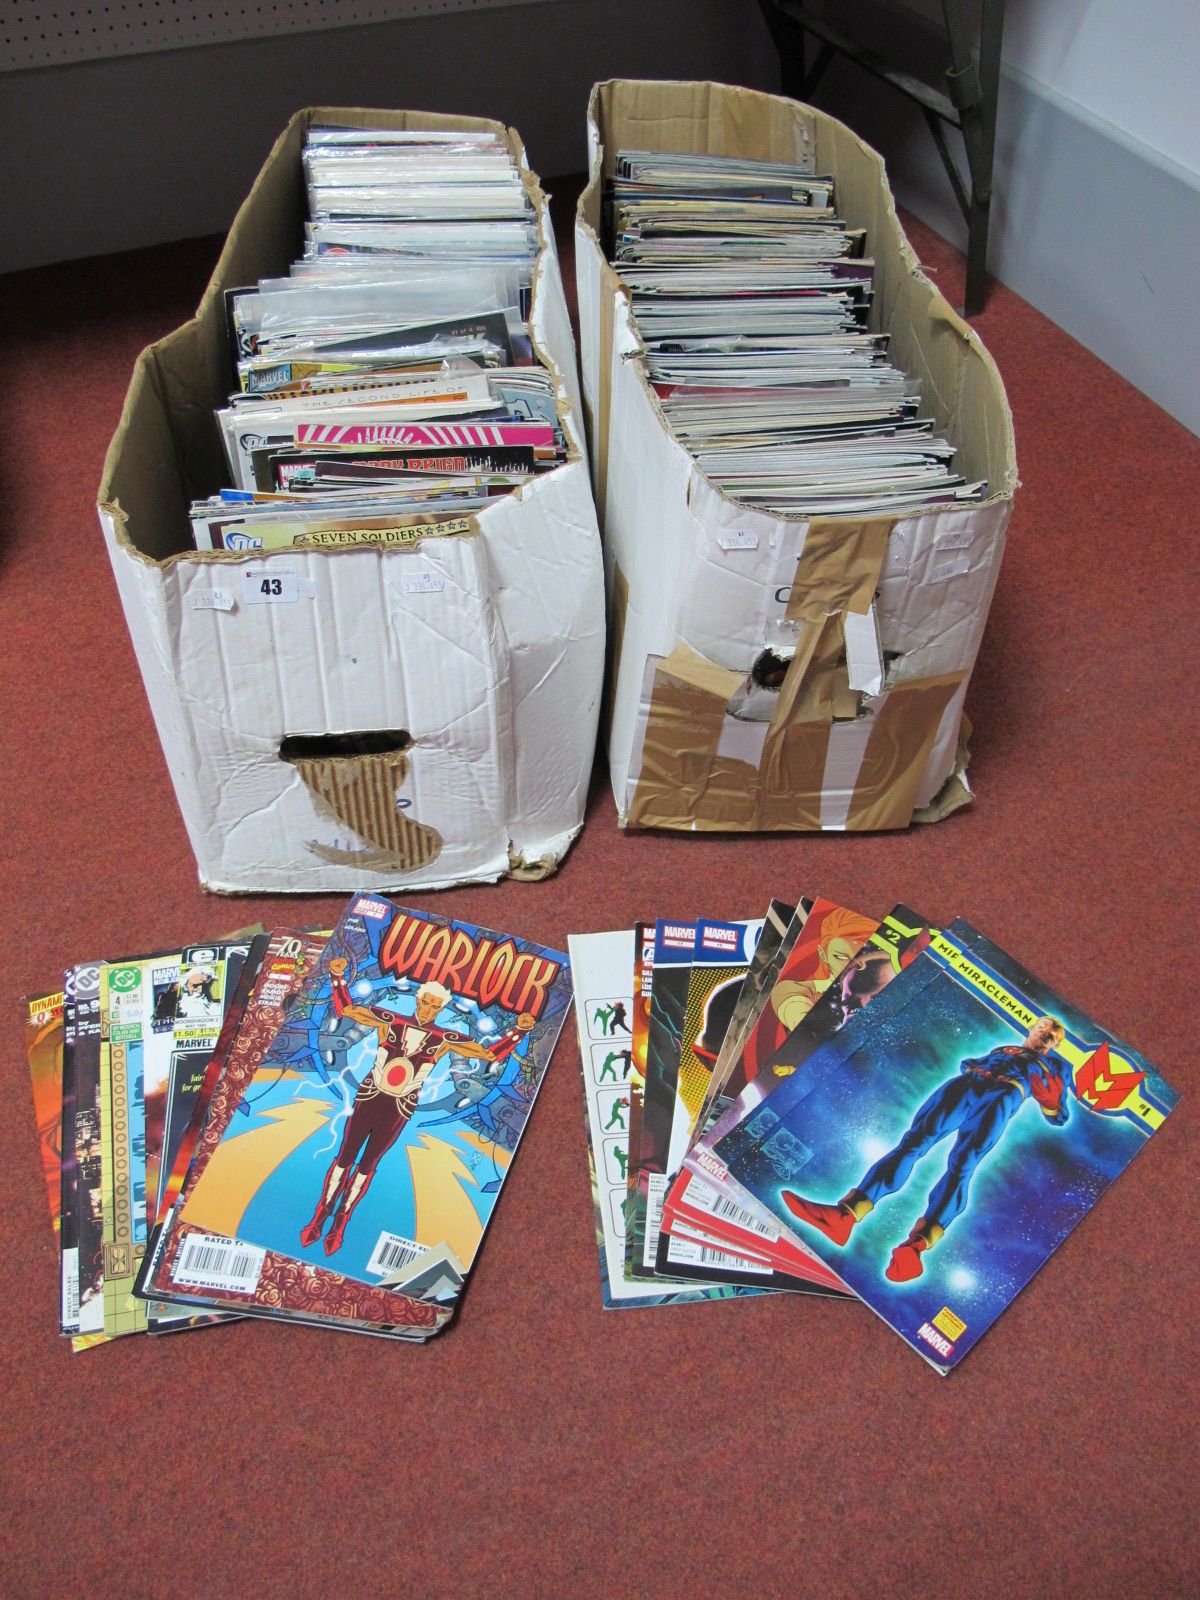 In Excess of Six Hundred Comics, by DC, Marvel, Tangent, Wildstorm including Avengers Arena.